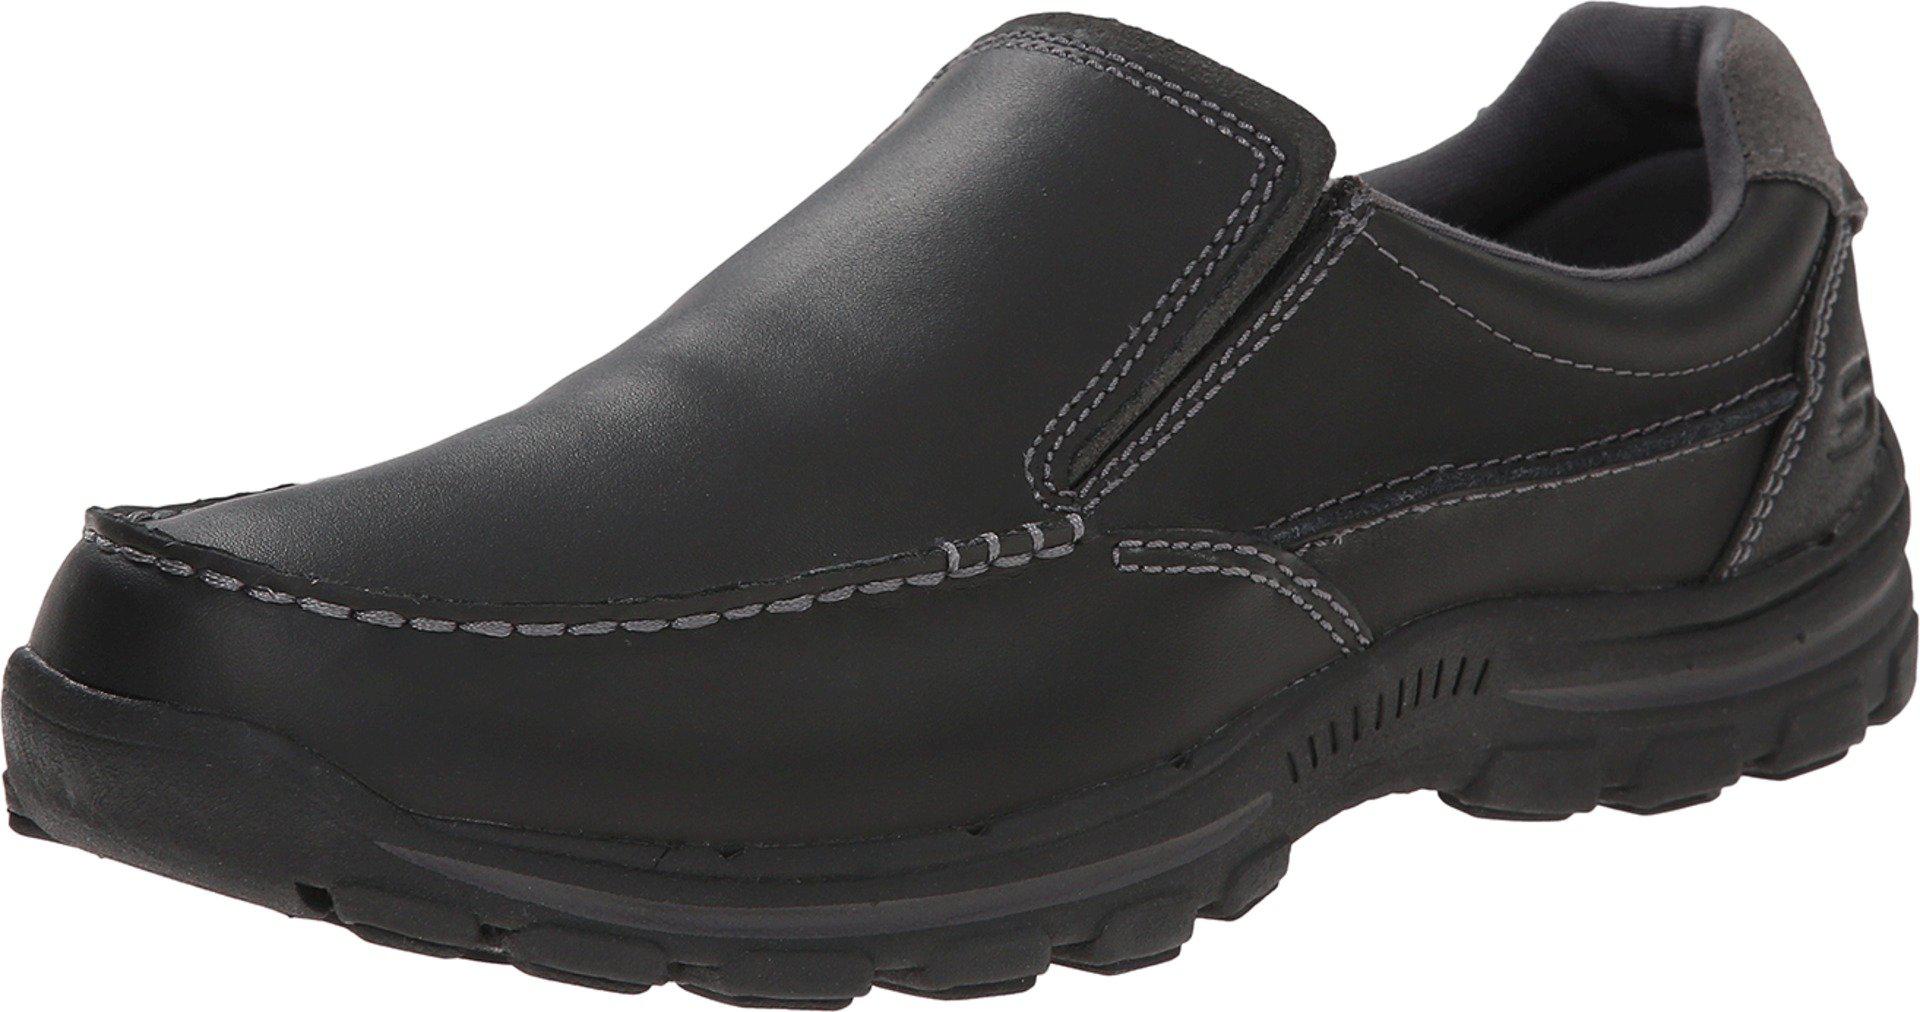 Skechers Suede Relaxed Fit: Braver - Rayland in Black Patent (Black ...